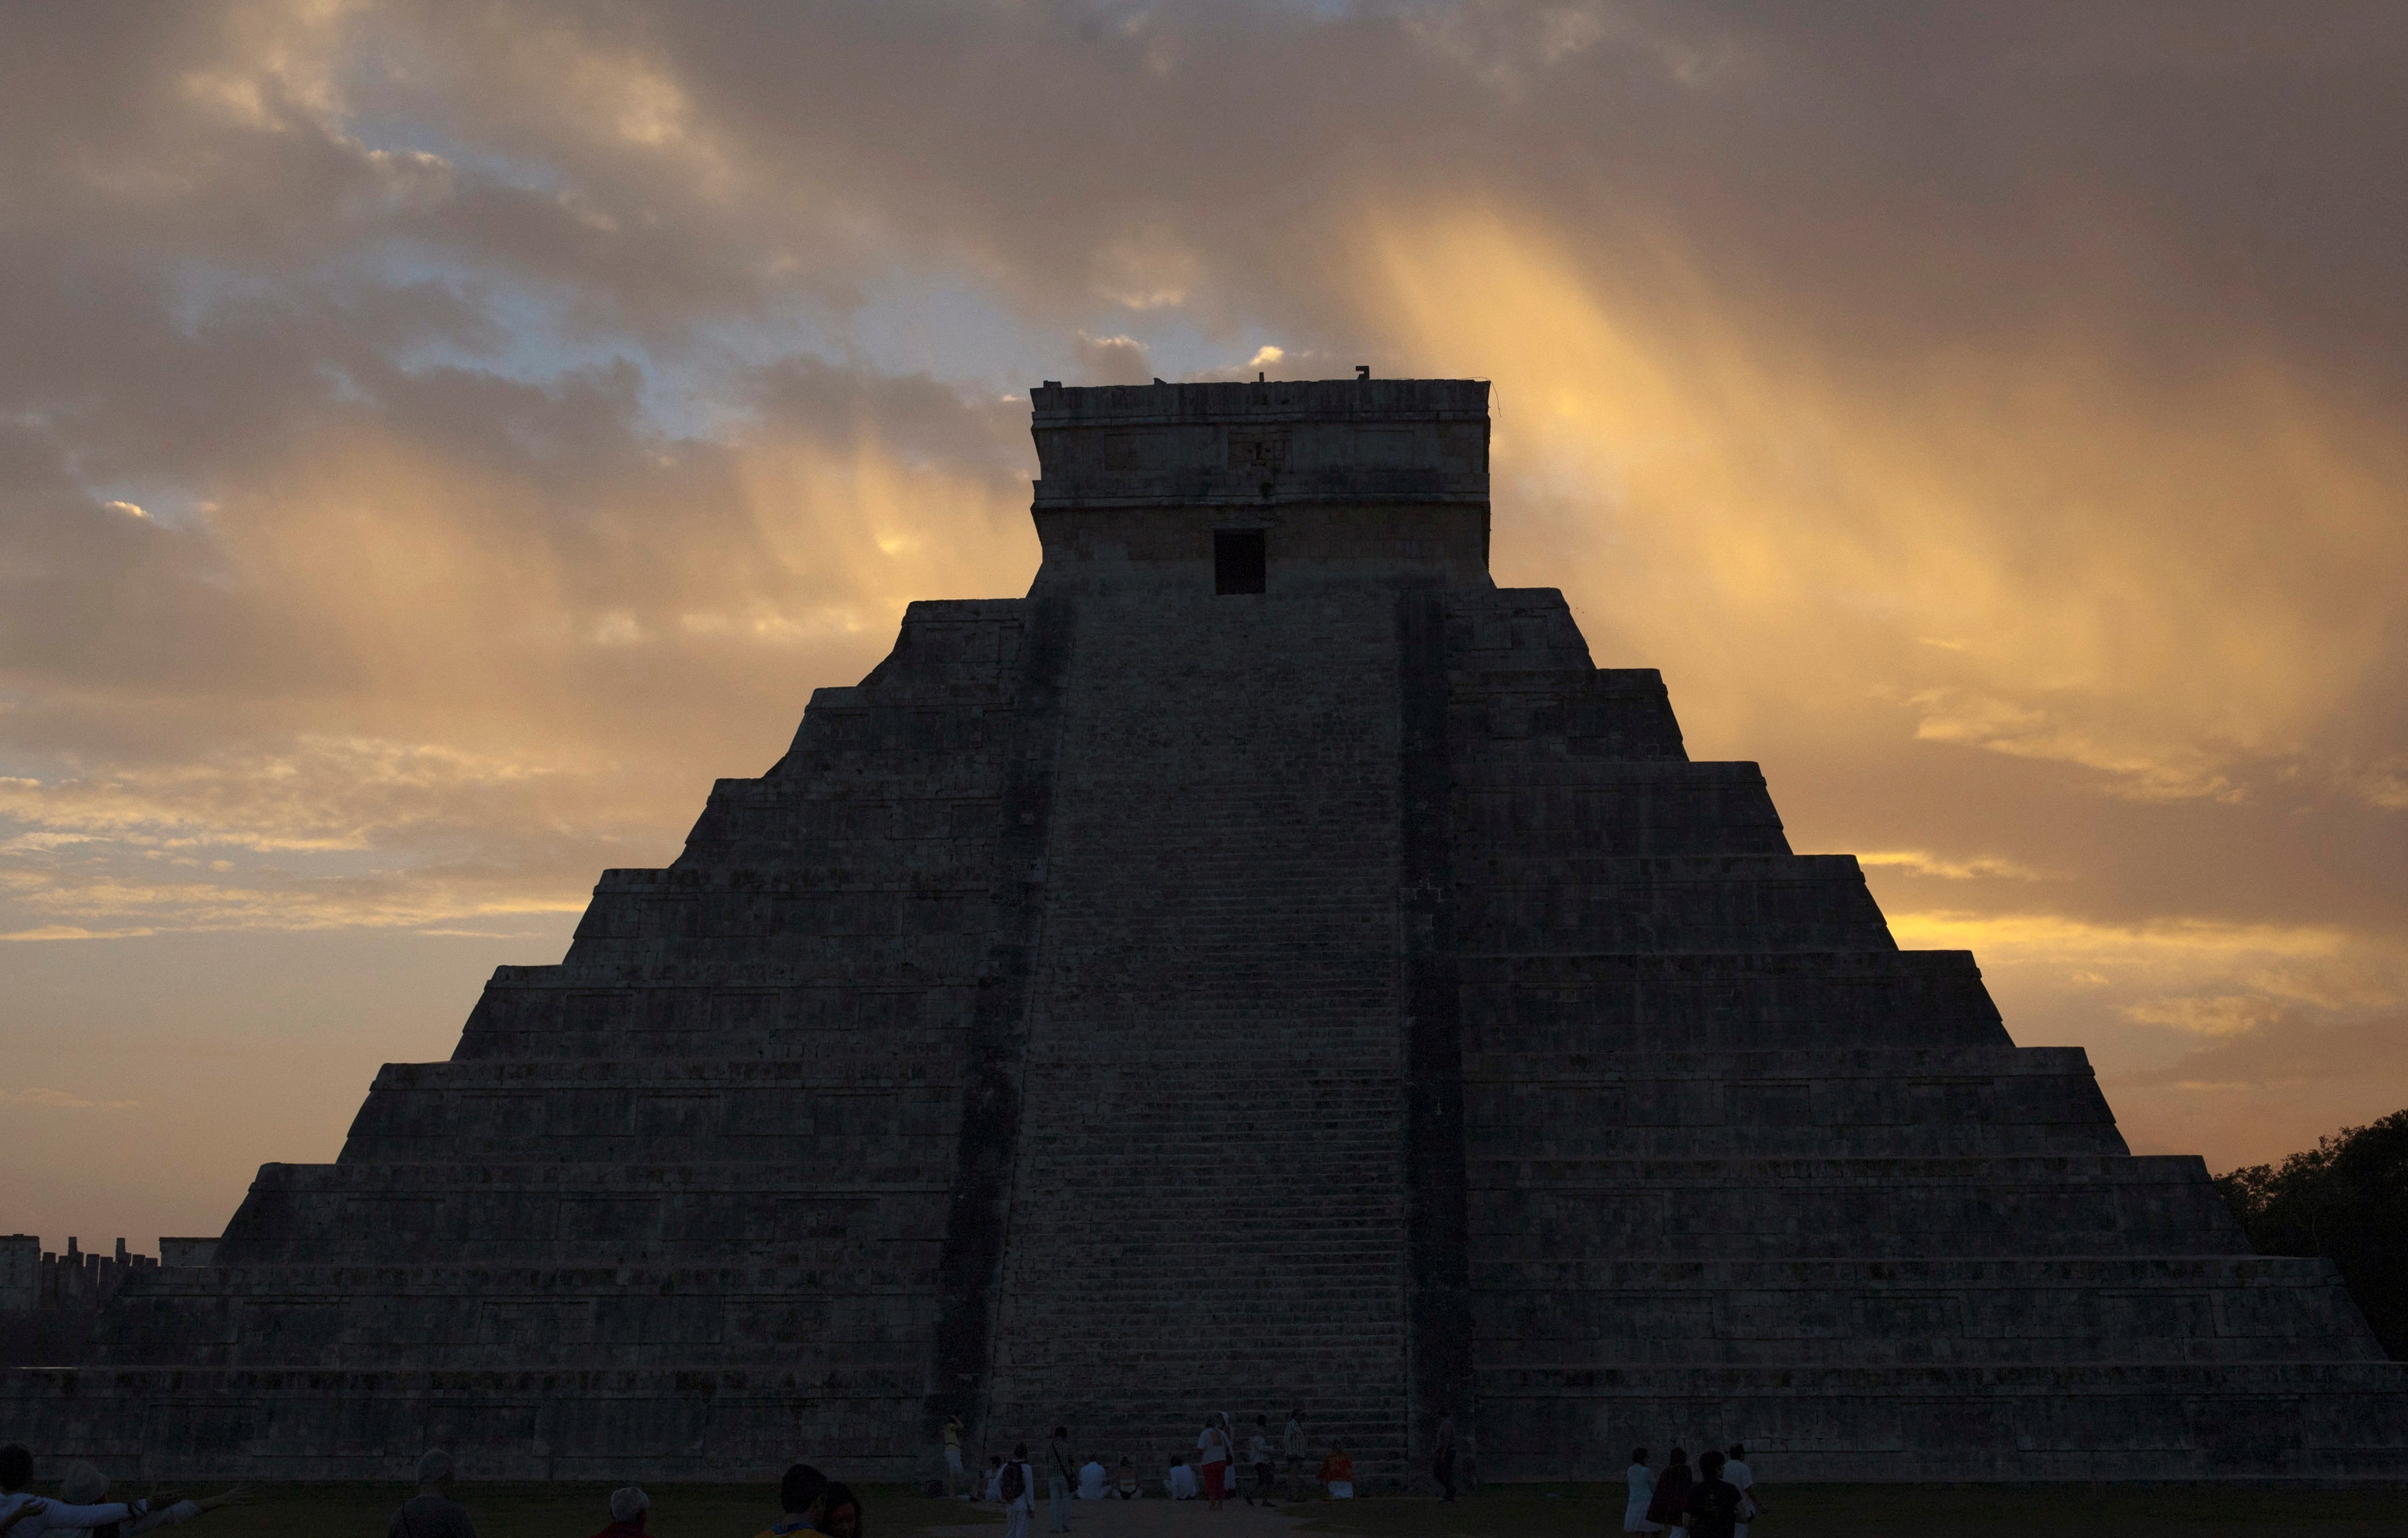 The pyramid of Kukulcan is seen during sunrise at the archaeological zone of Chichen Itza in Yucatan State